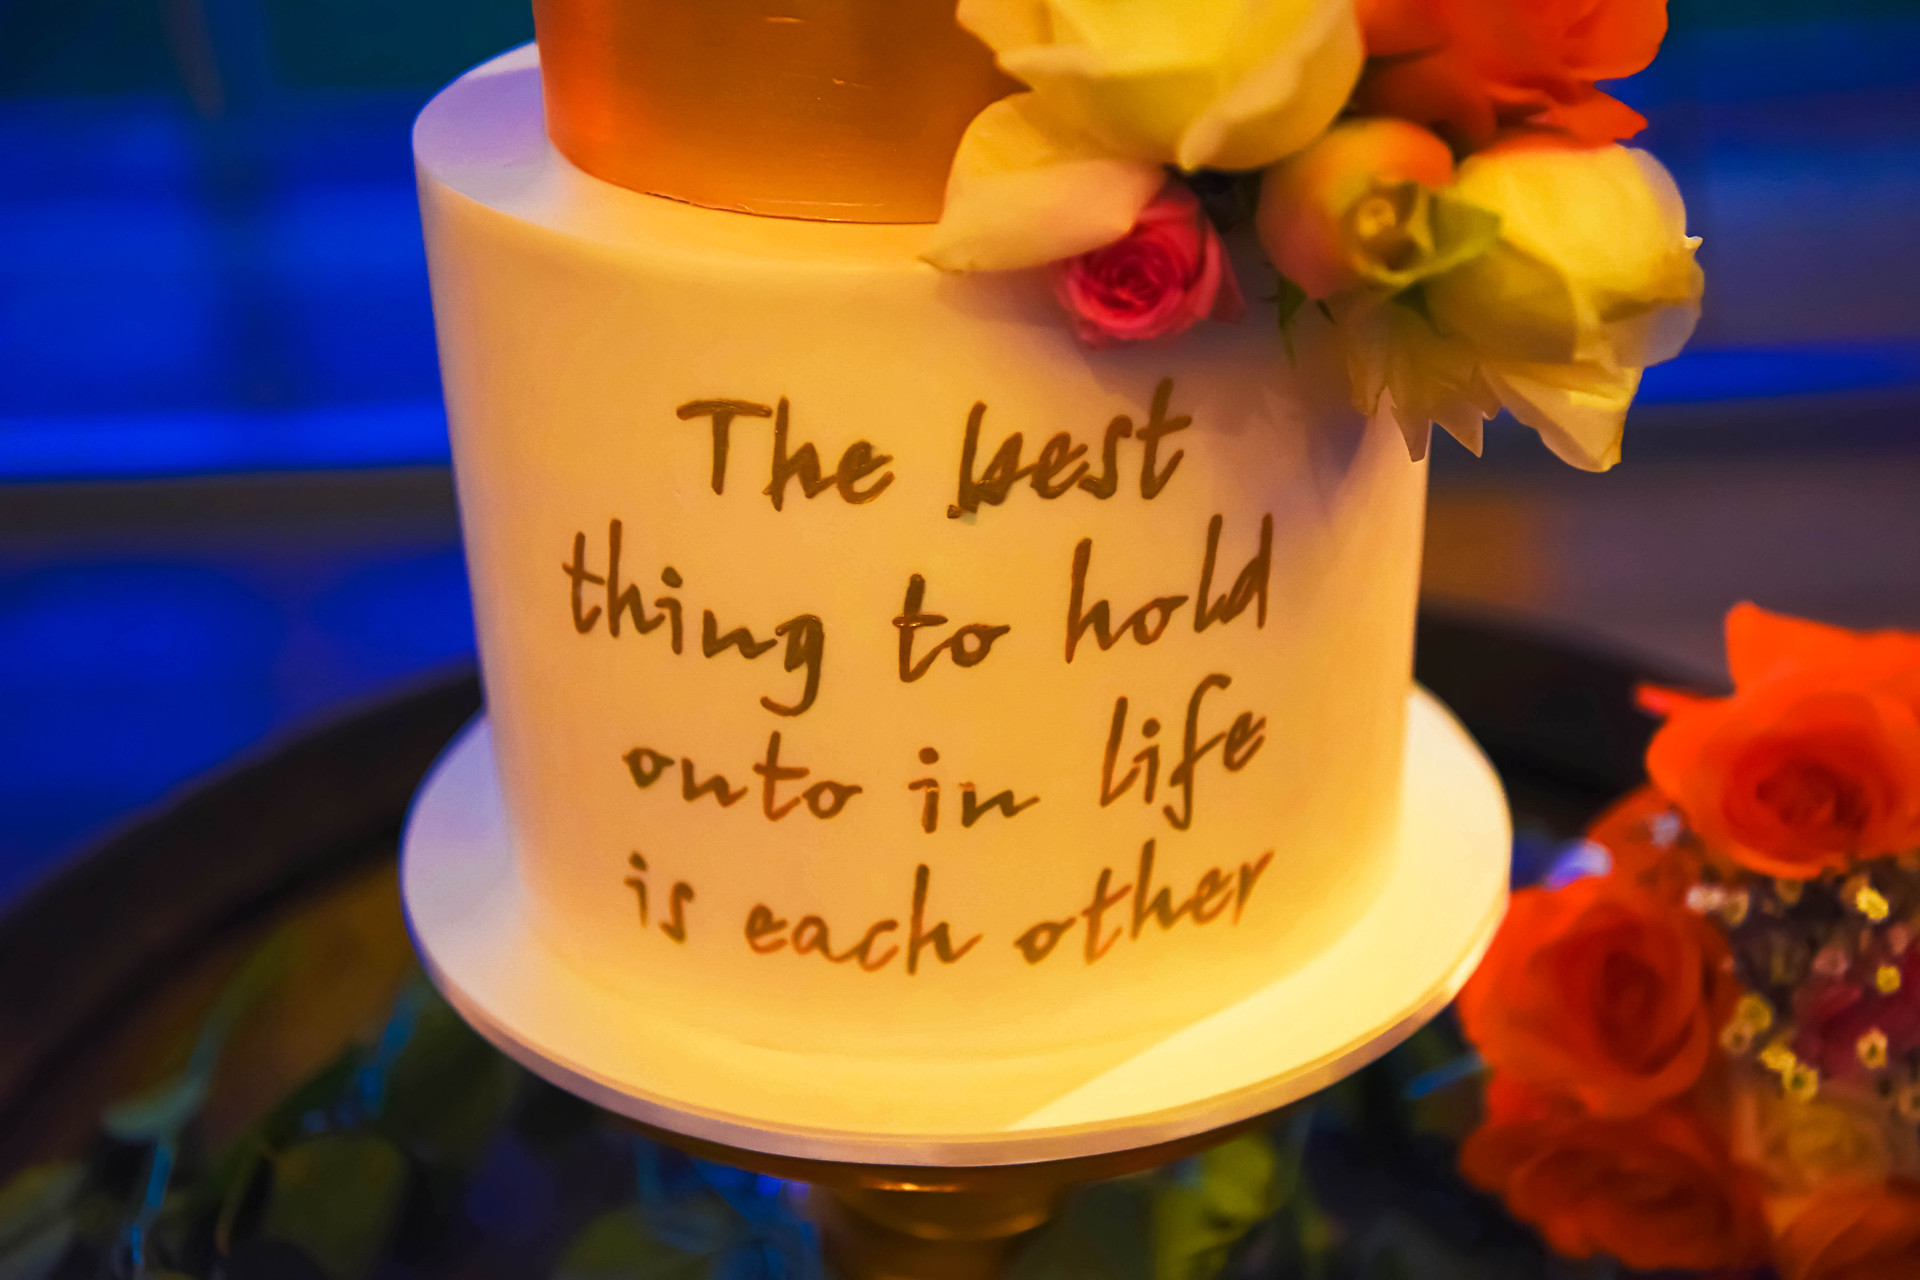 inspirartional quote on the wedding cake